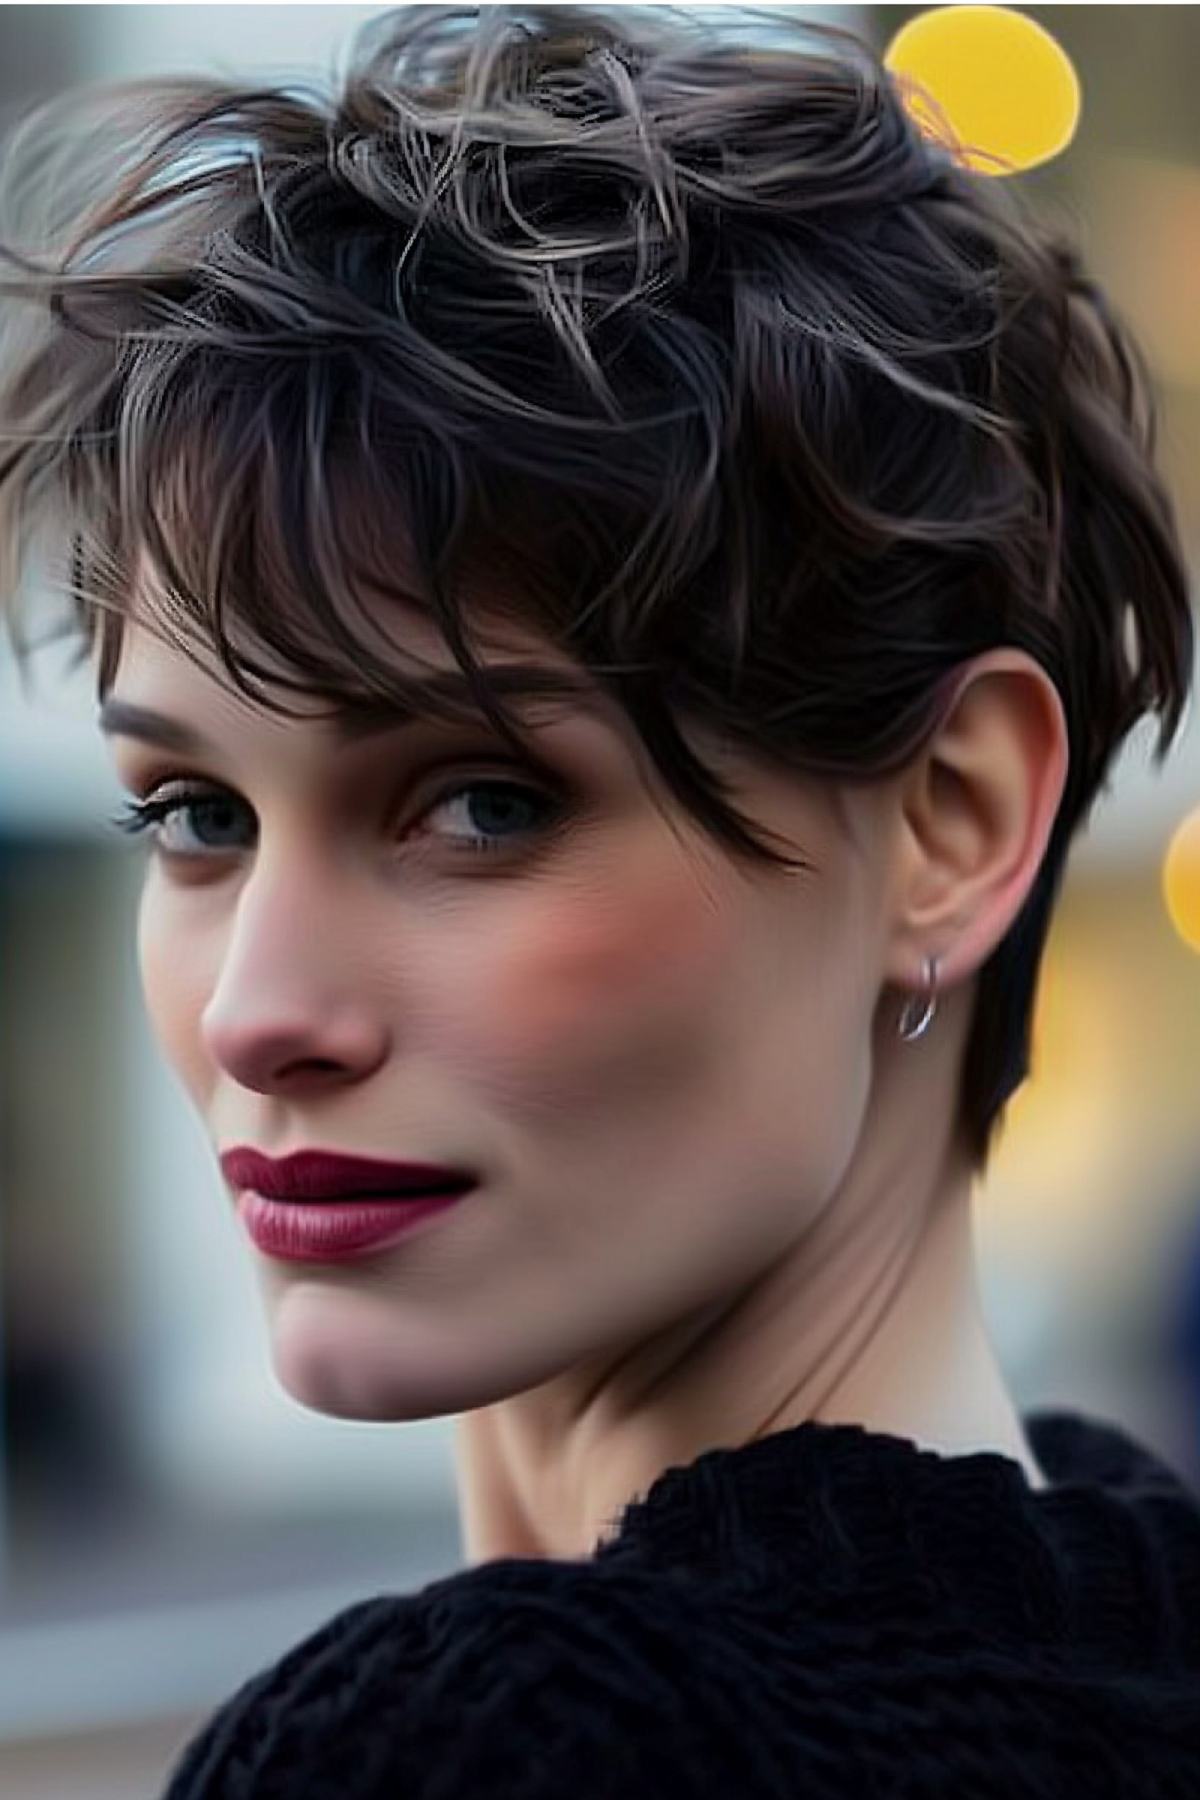 Stylish woman with curly short pixie haircut highlighting voluminous curls and shorter sides